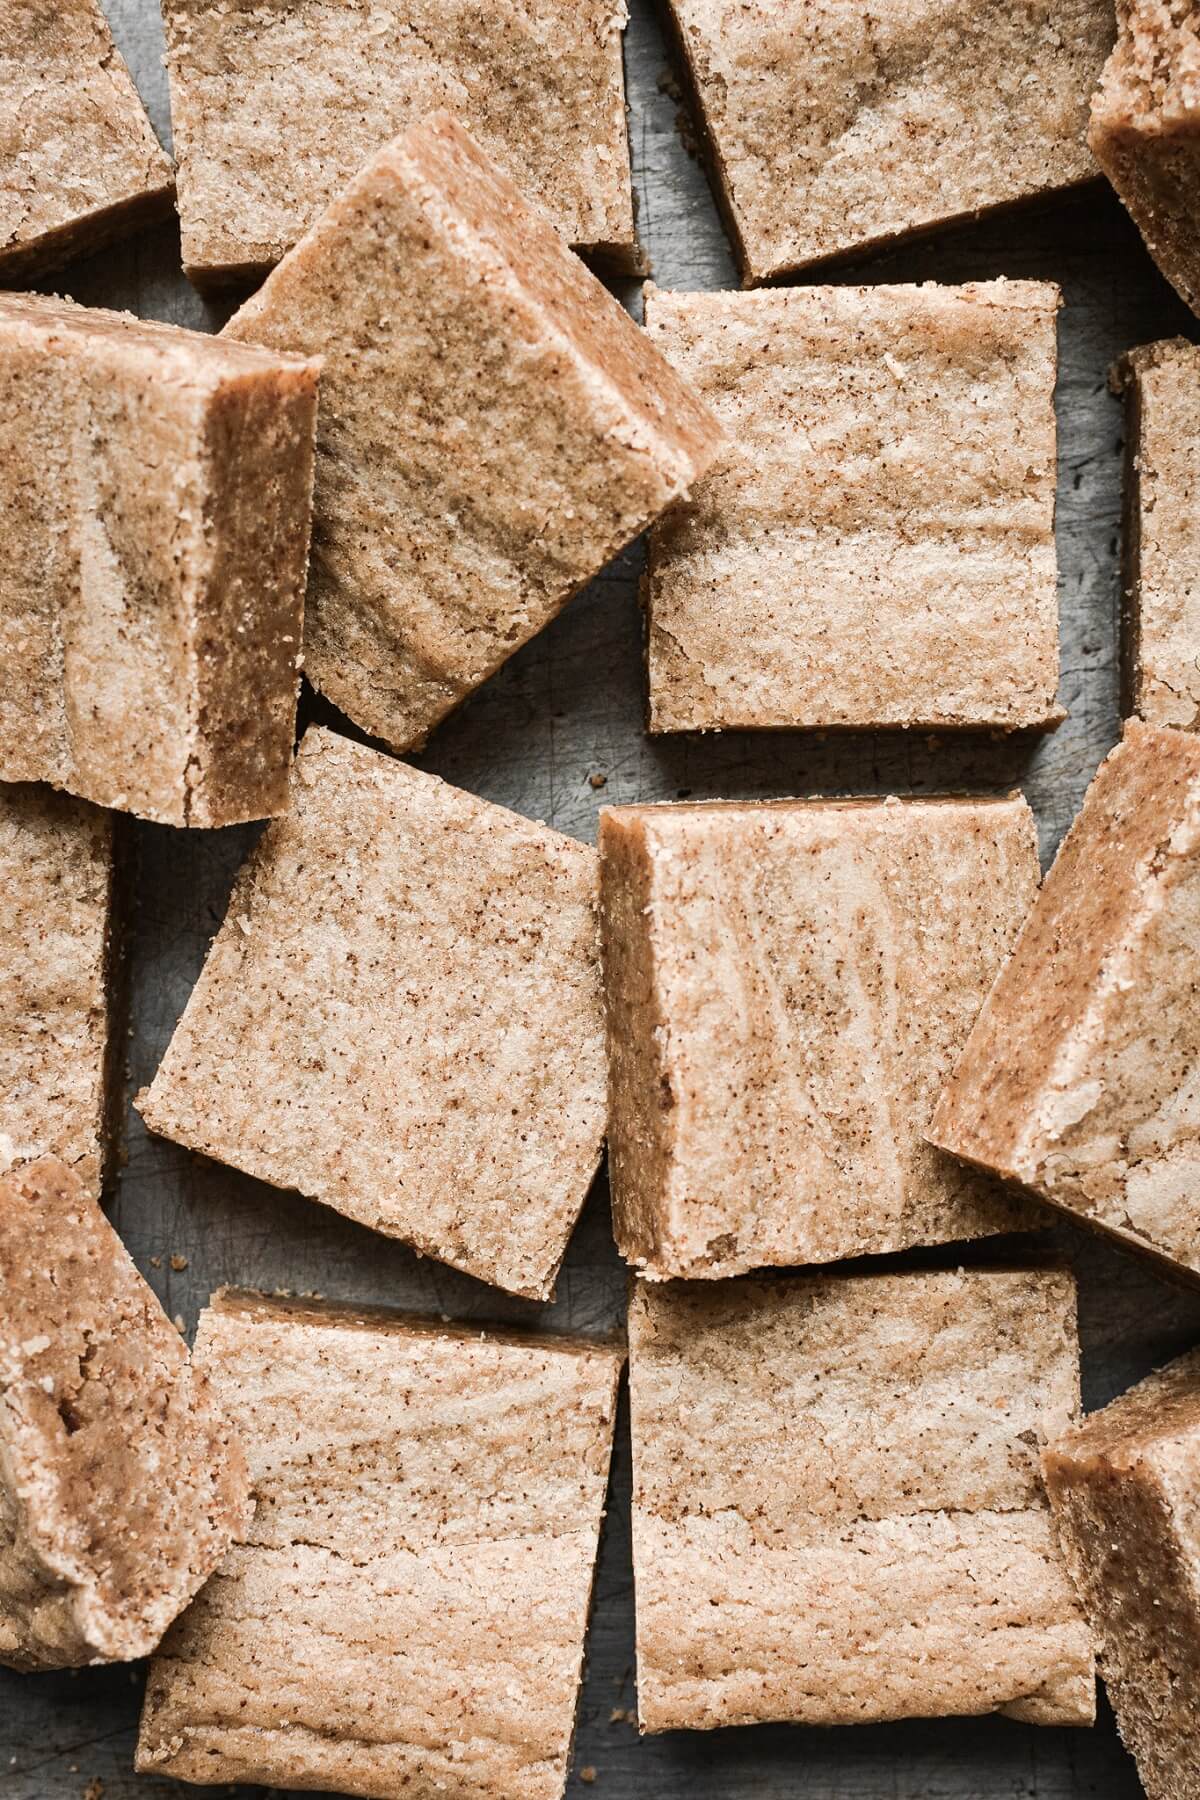 Coffee cookie bars cut into squares.